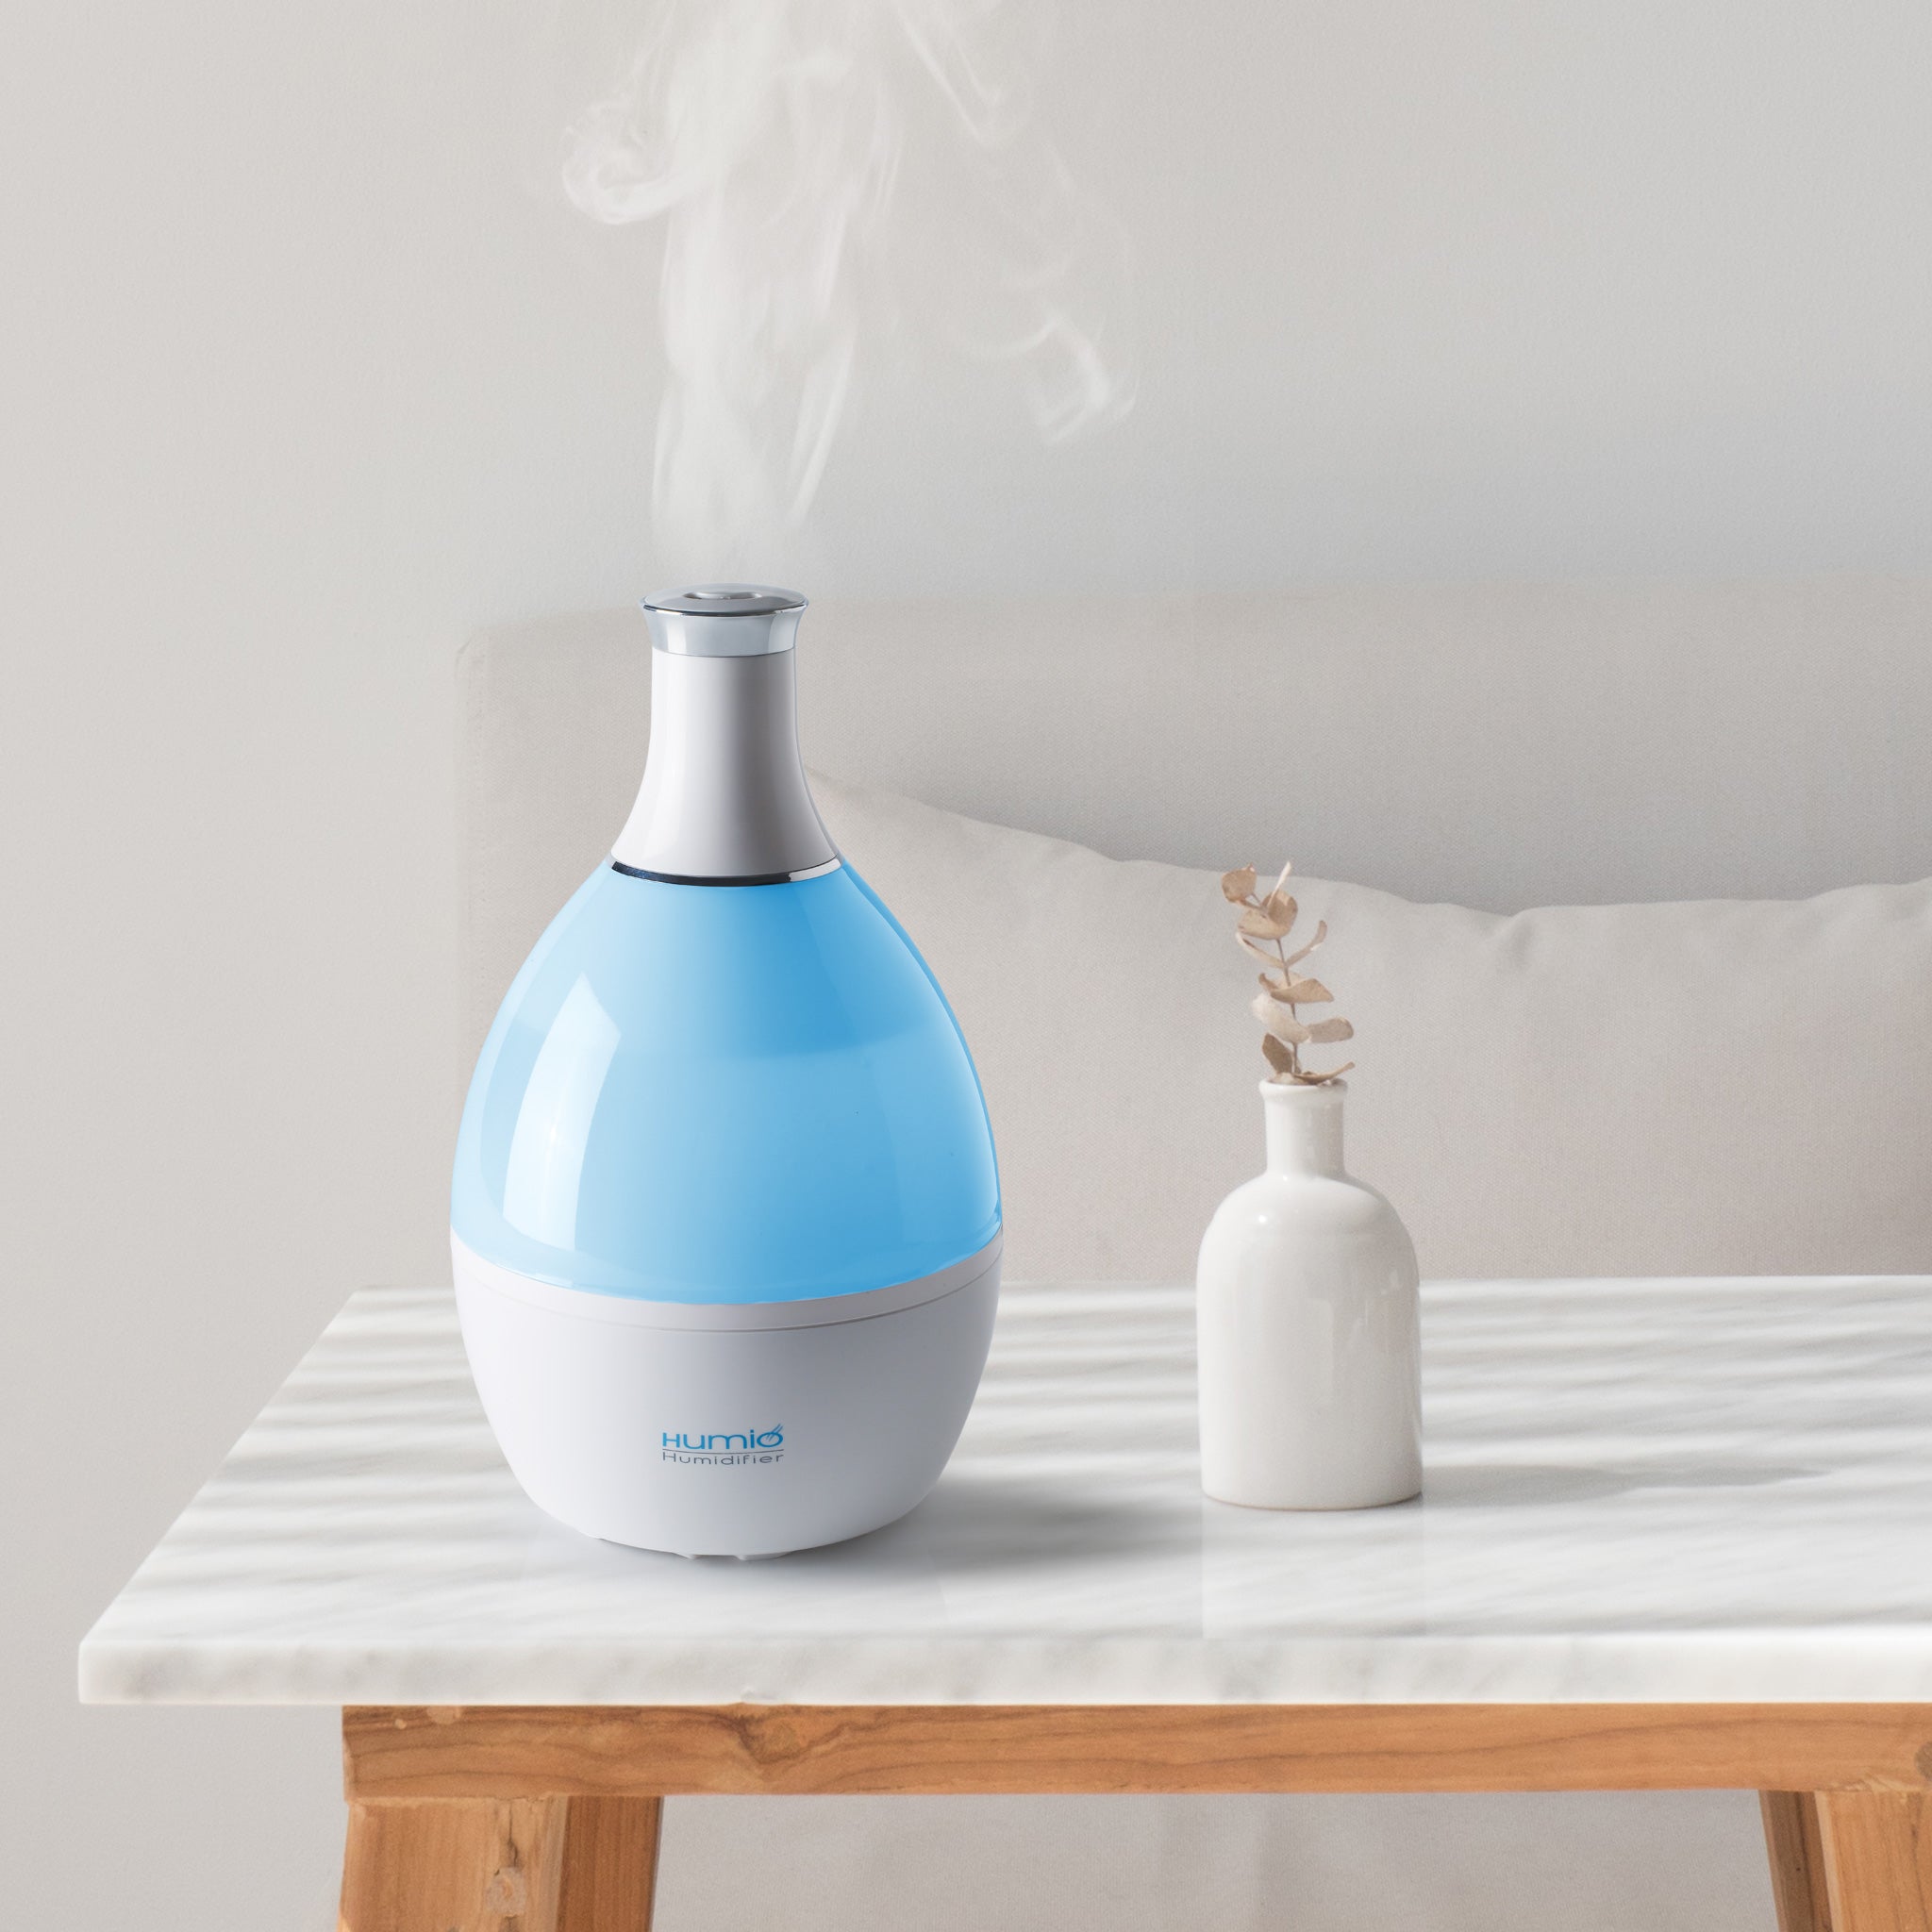 Smoke from Ultrasonic Aroma Diffuser and colorful light on black background.  Color Steam moving in d, Stock Footage